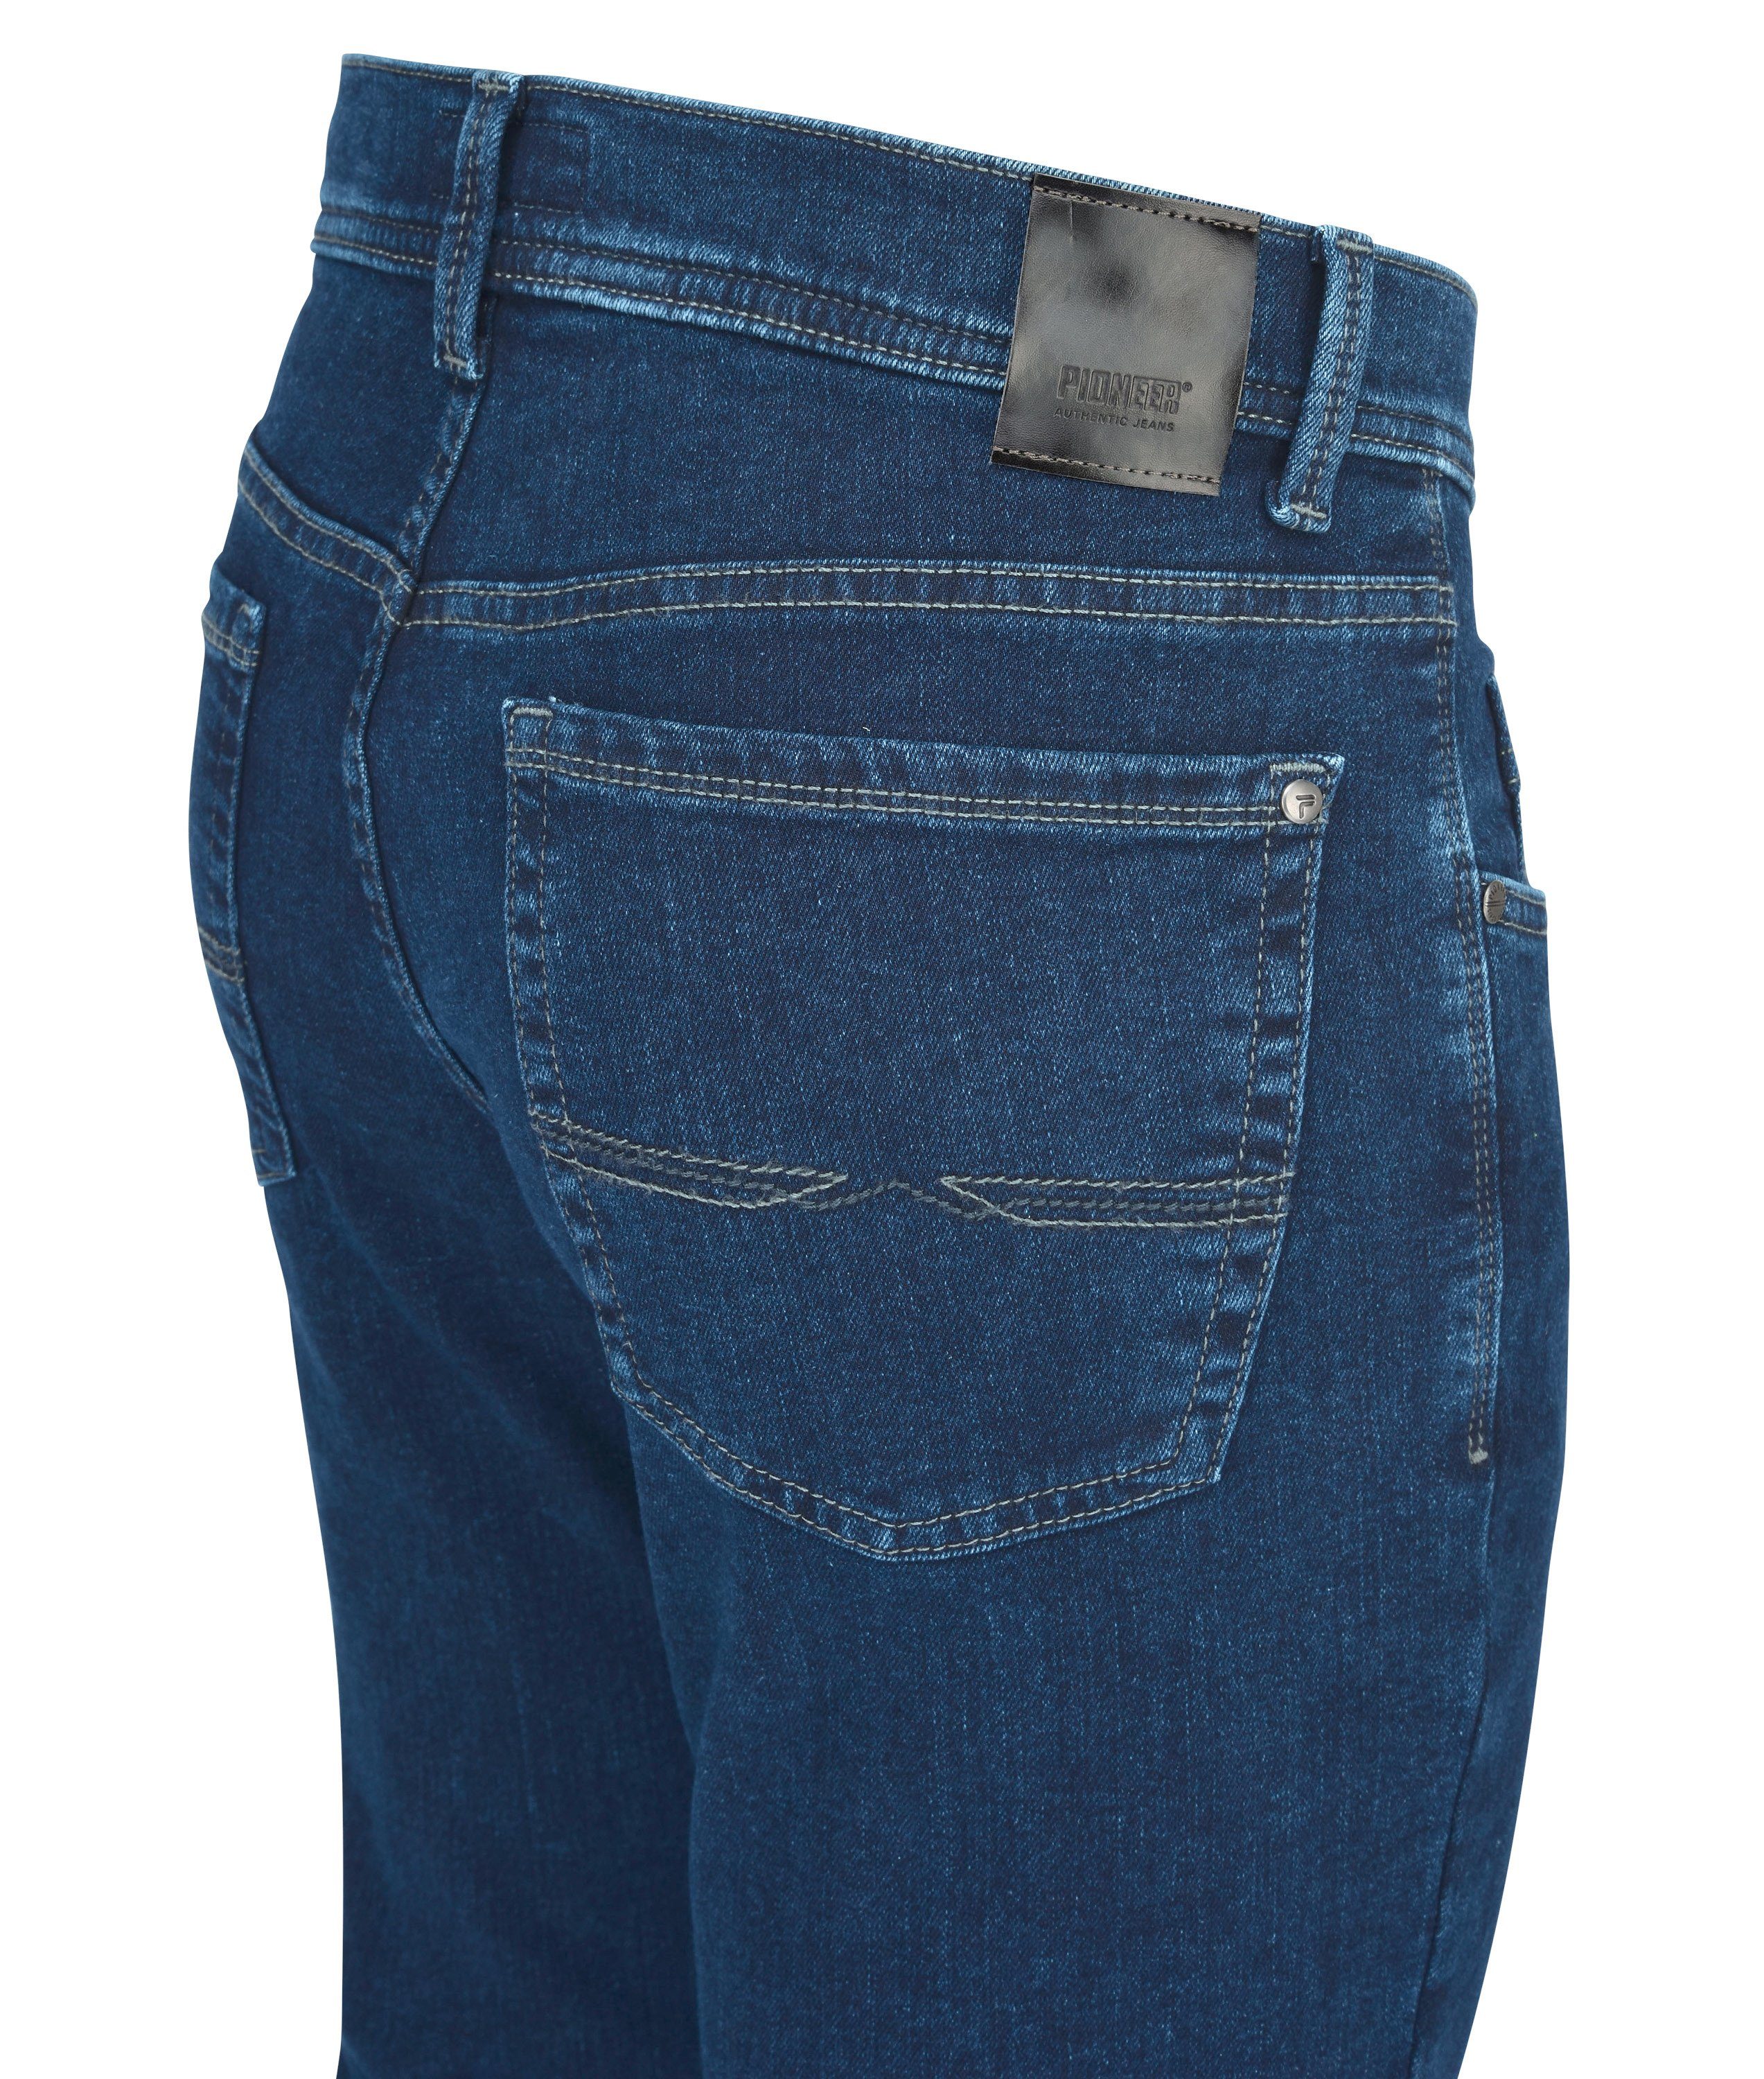 Authentic blue 9504.05 - Jeans 5-Pocket-Jeans THERMO 1680 PIONEER RANDO denim Pioneer